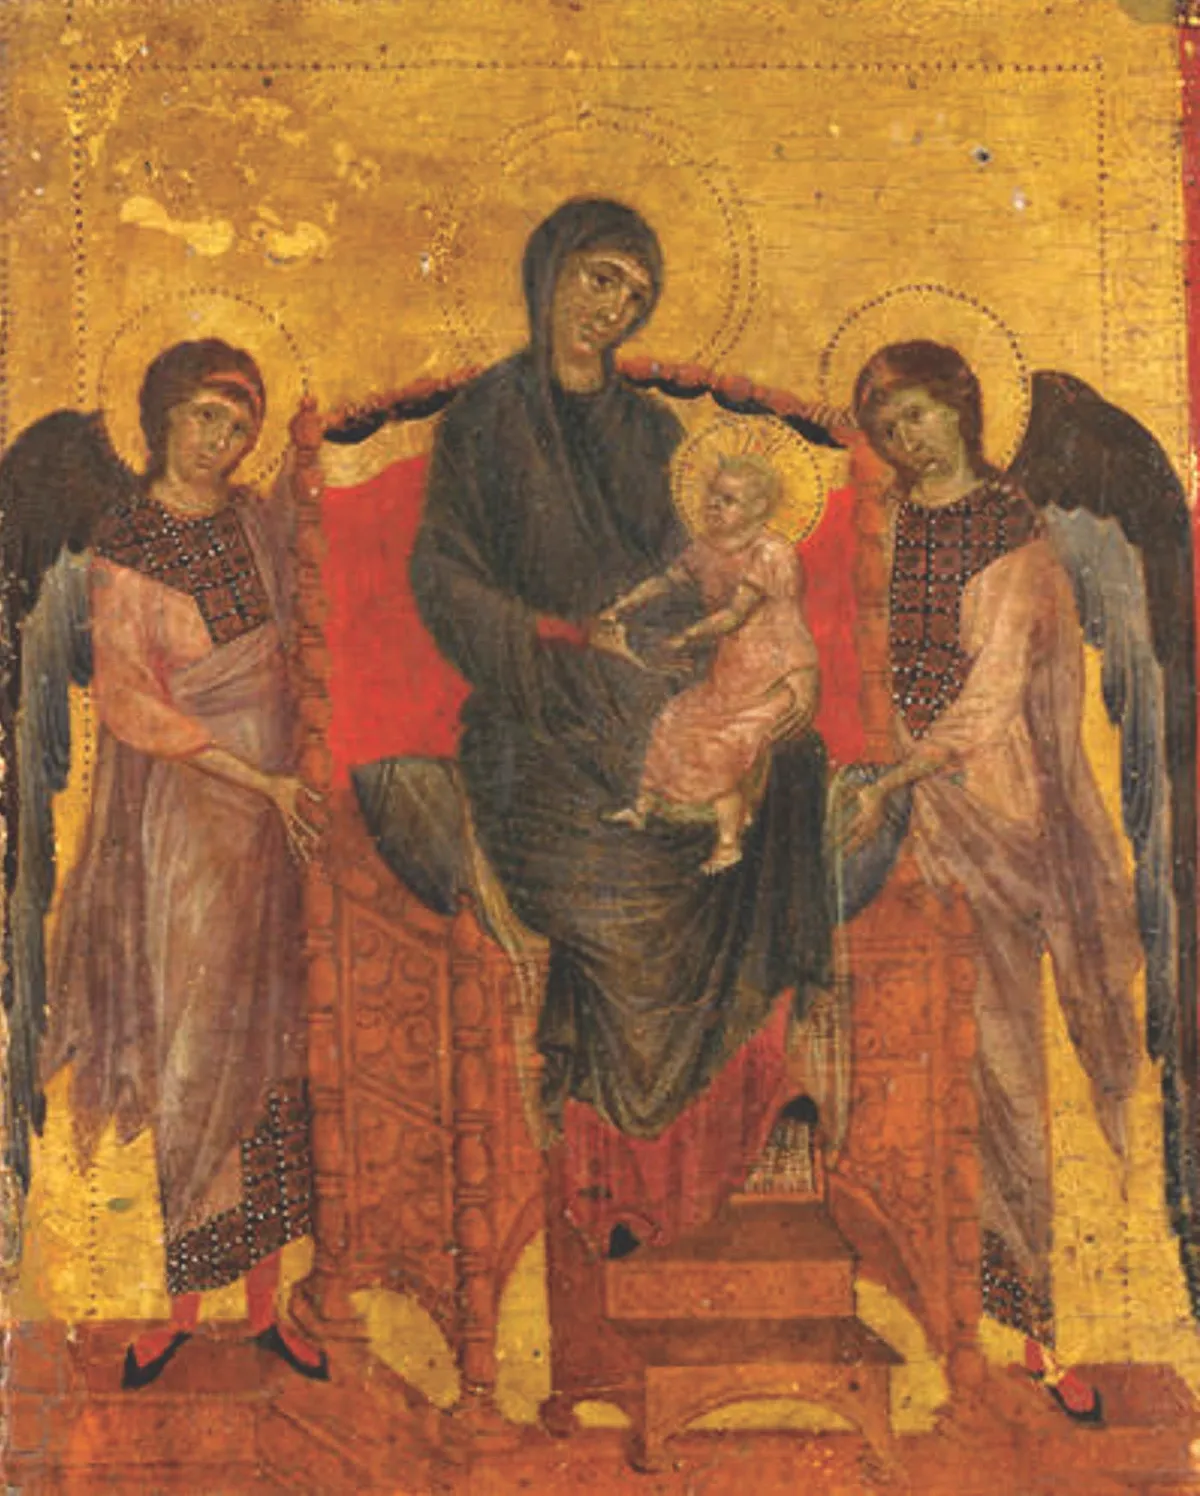 HKRHPM Cimabue, The Virgin and Child Enthroned with Two Angels